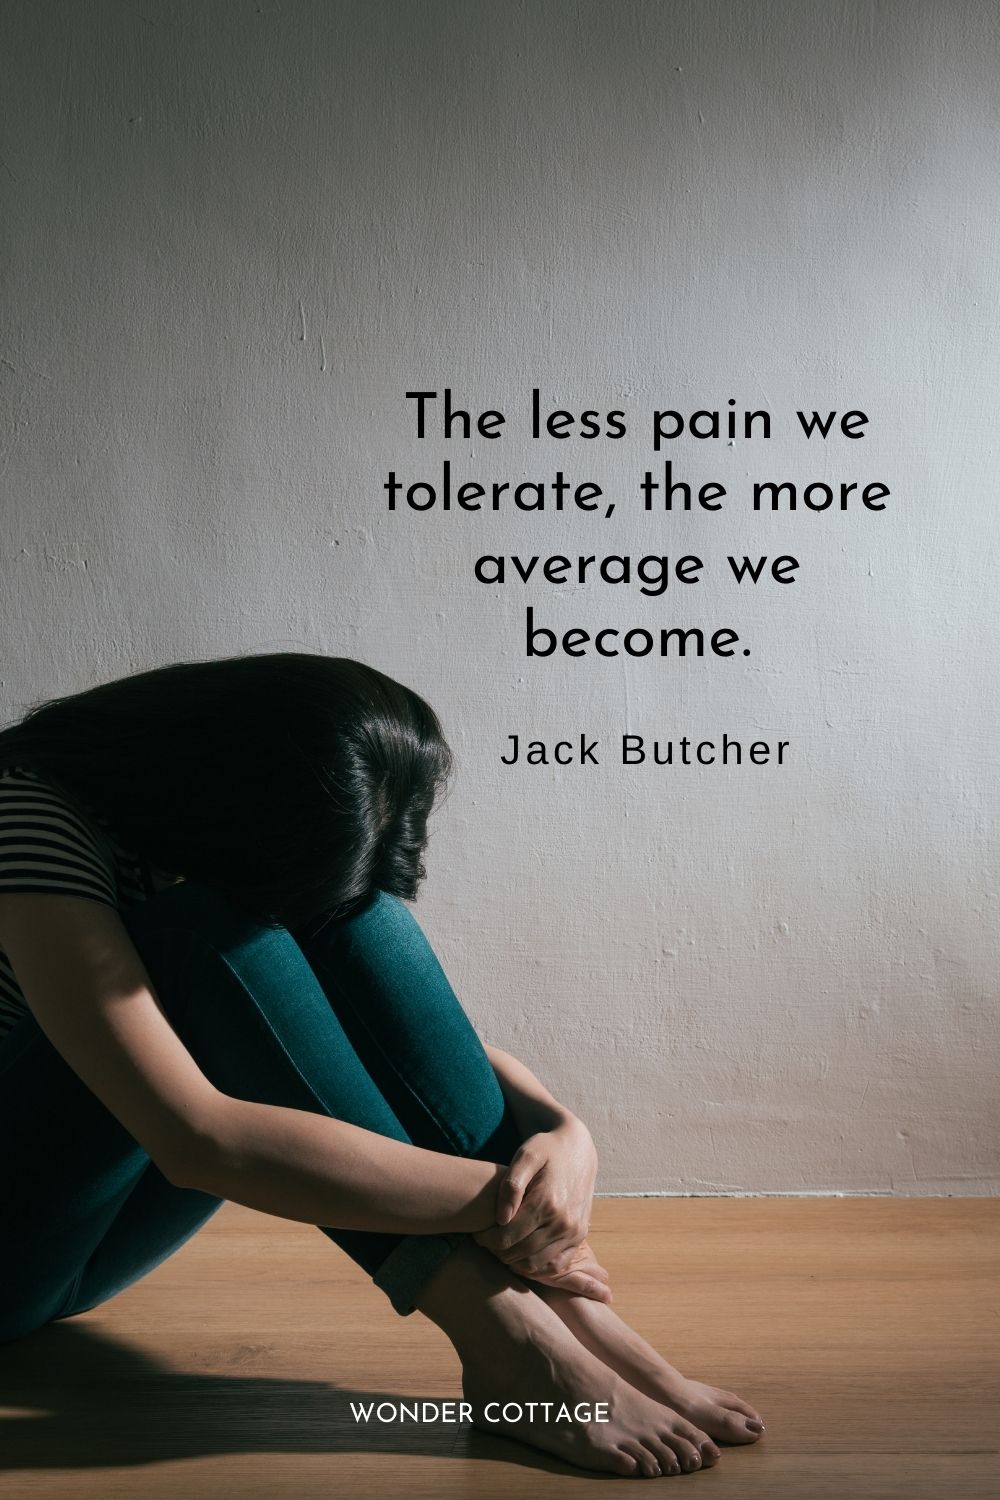 The less pain we tolerate, the more average we become.  Jack Butcher